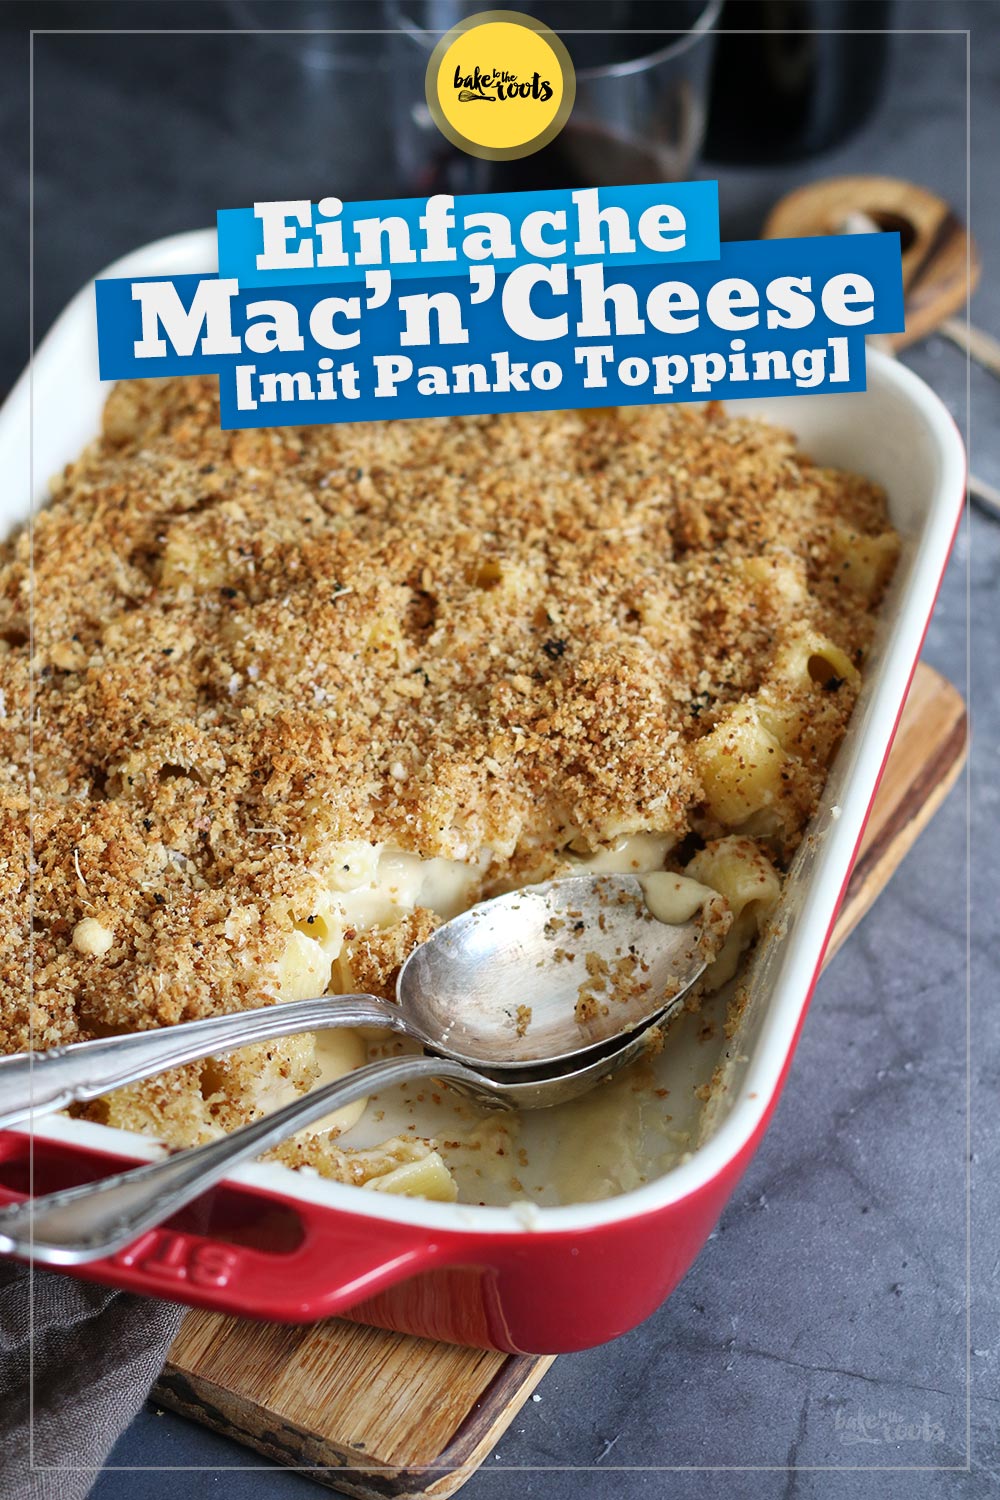 Mac'n'Cheese mit Panko Topping | Bake to the roots